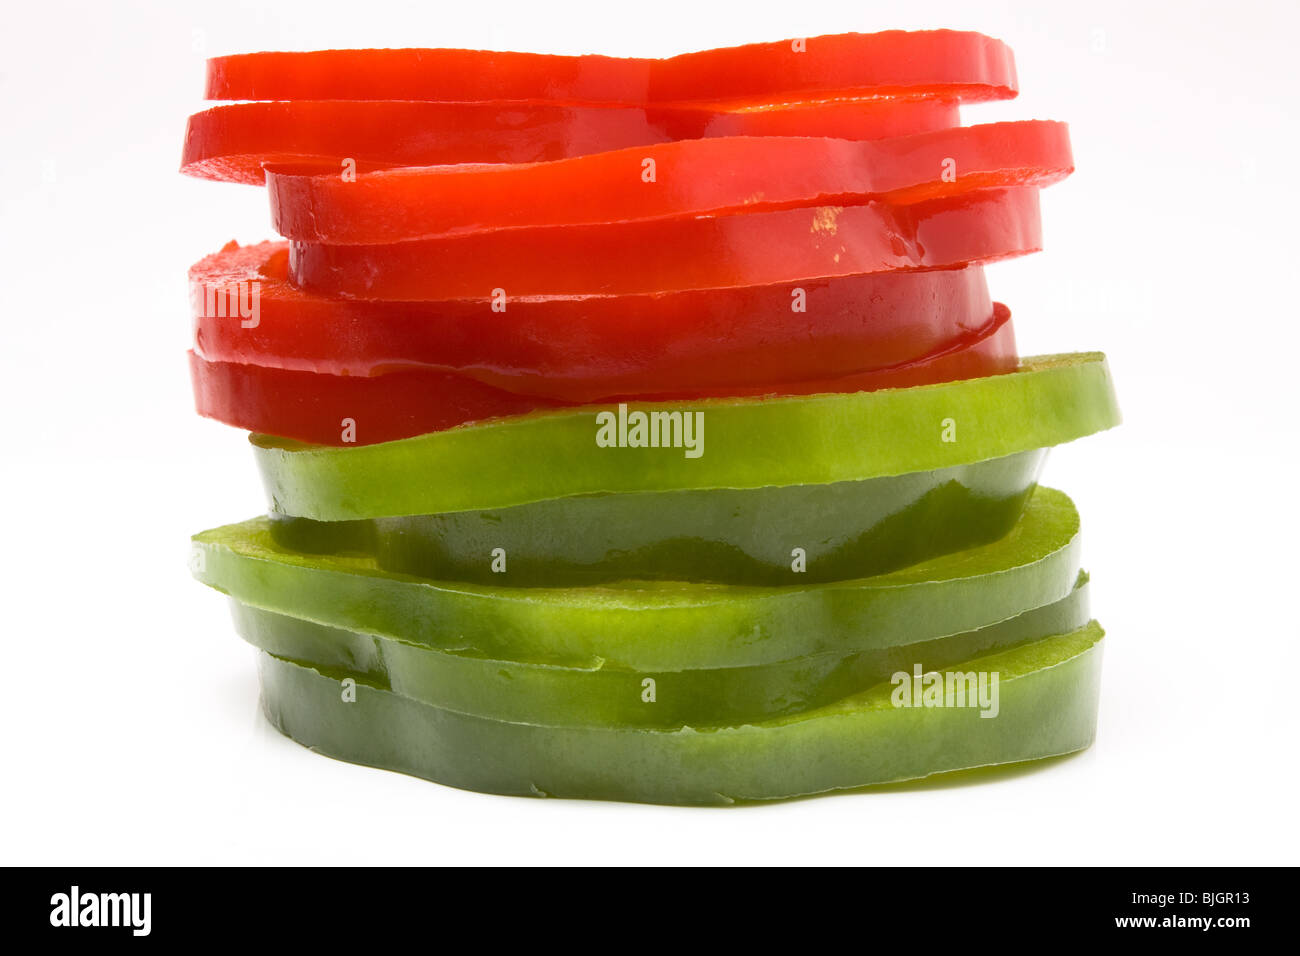 Stack of Sliced Red and Green Peppers arranged on white background. Stock Photo